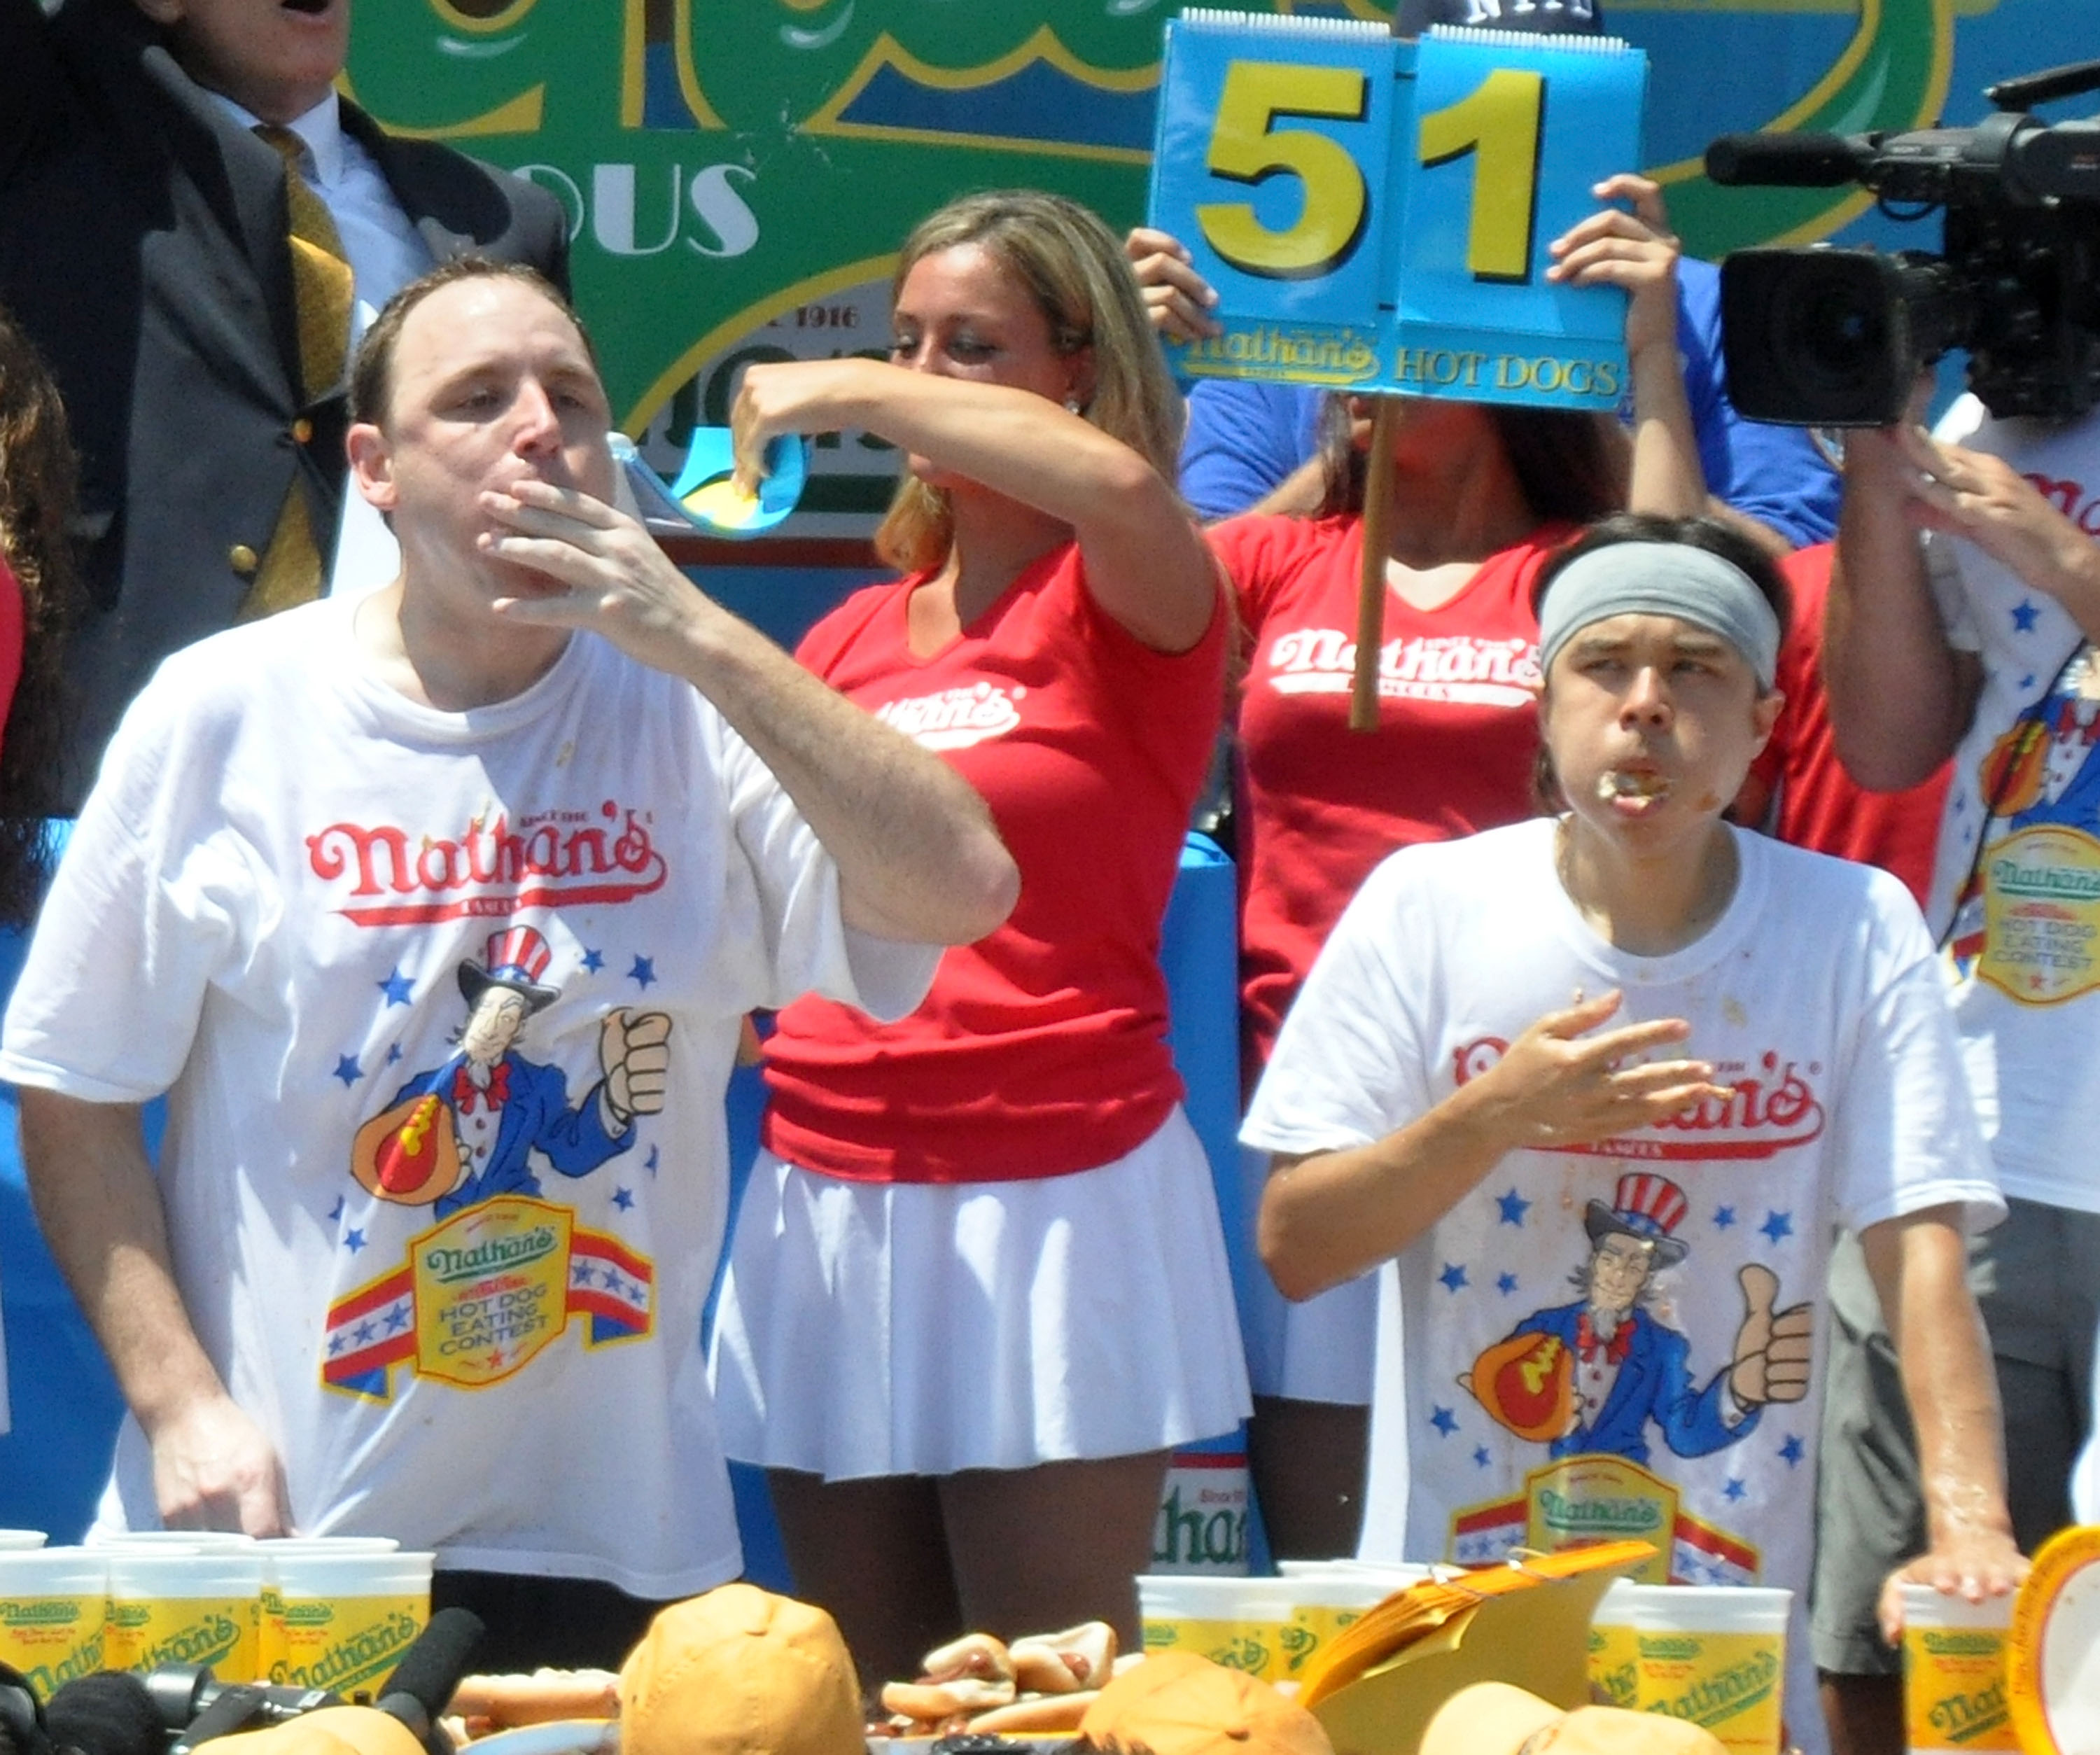 Joey Chestnut and Matt Stonie compete in the 2013 Nathan's Famous Hot Dog Eating Contest at Coney Island on July 4, 2013 in New York City. (Bobby Bank—WireImage)